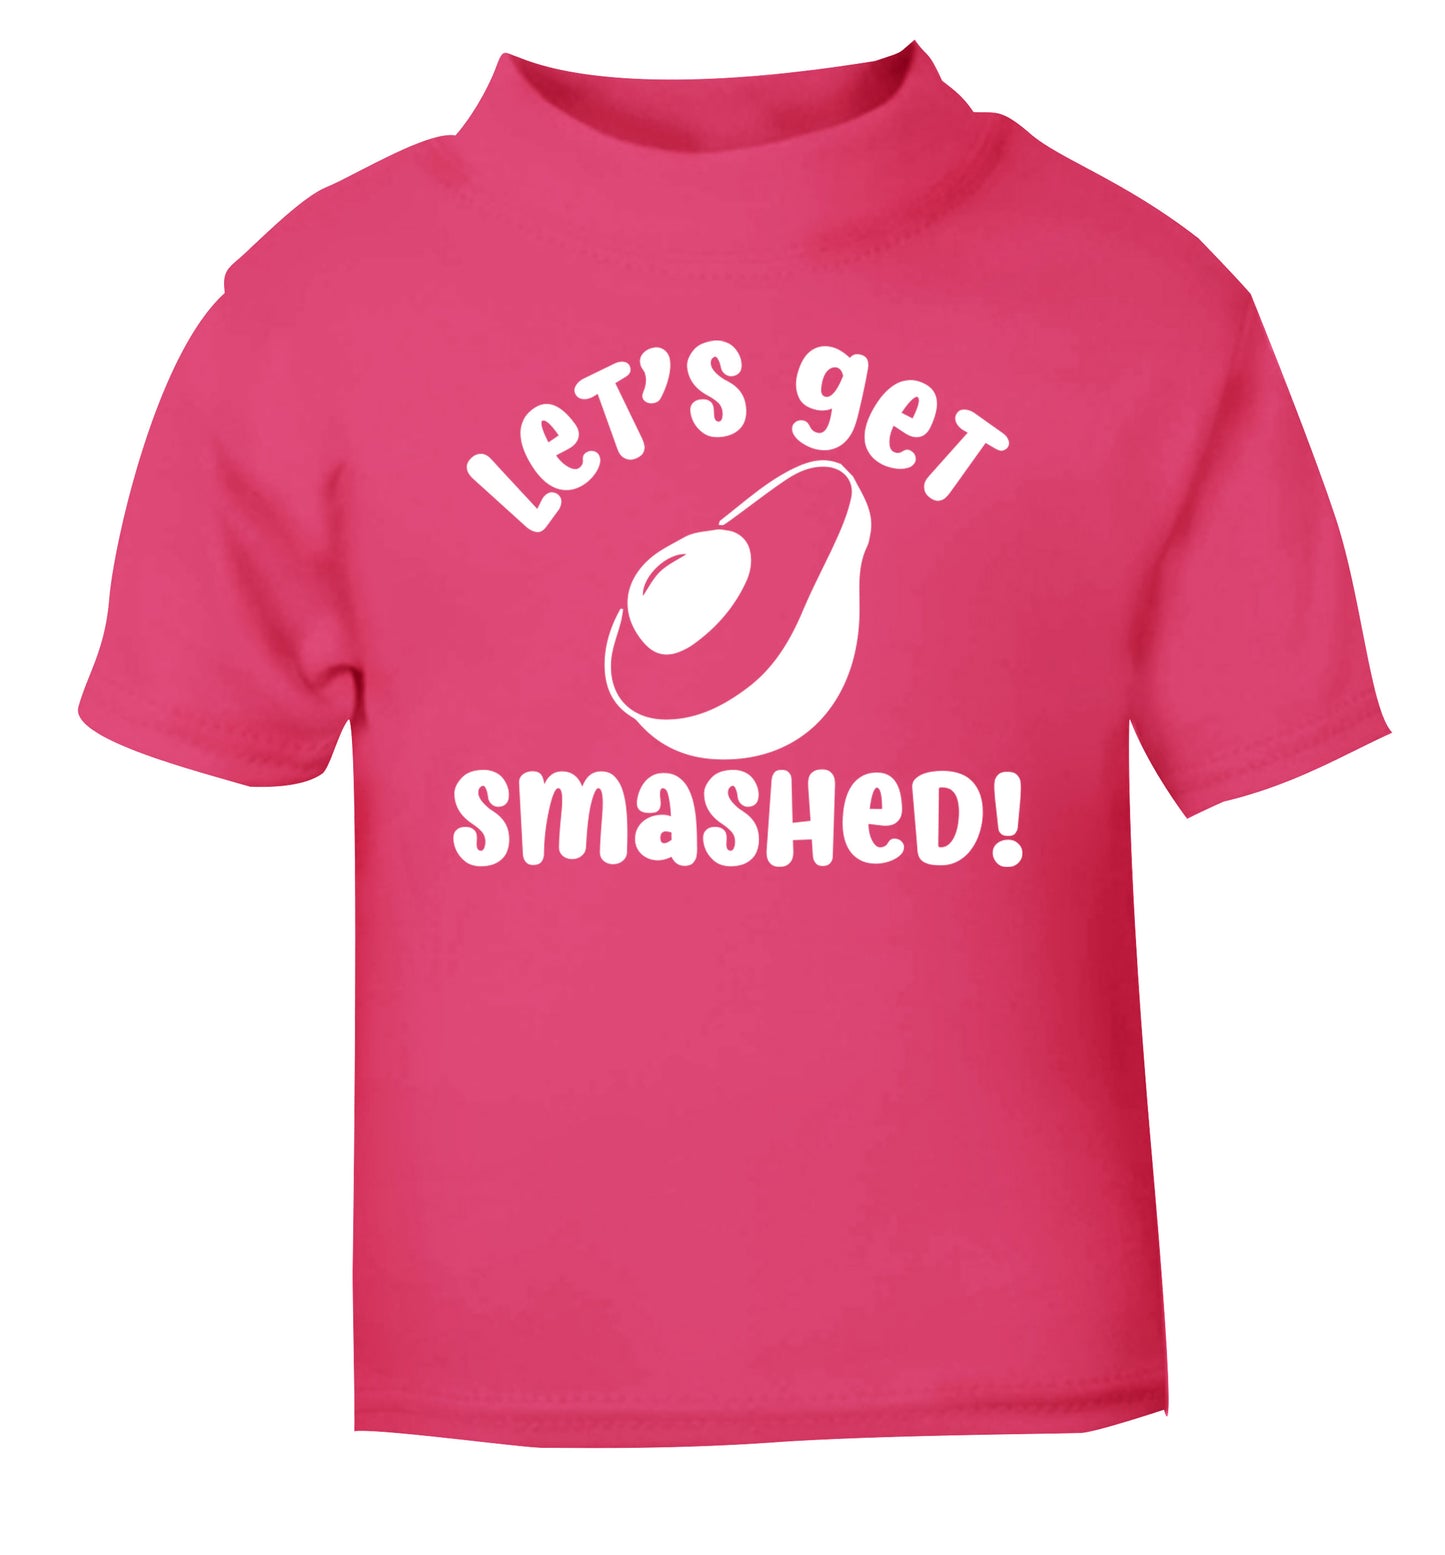 Let's get smashed pink Baby Toddler Tshirt 2 Years